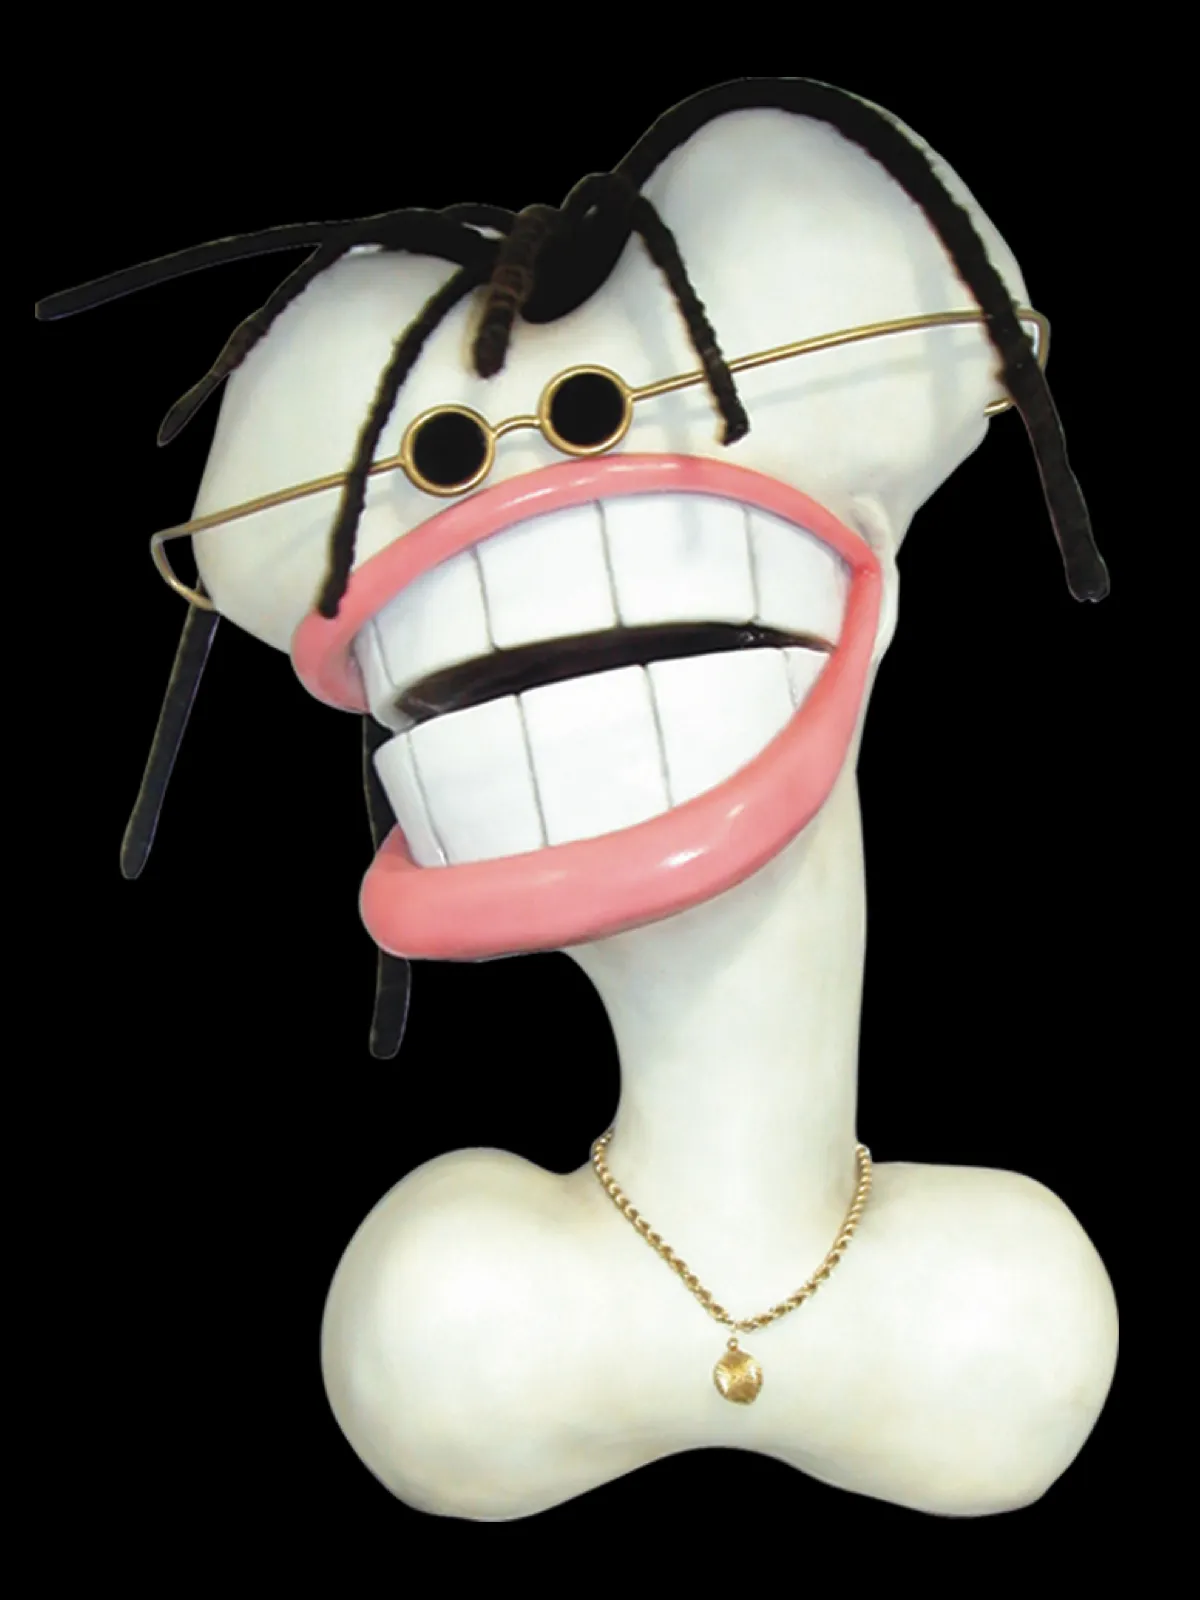 Large bone object with dreadlocks, glasses and smiling teeth